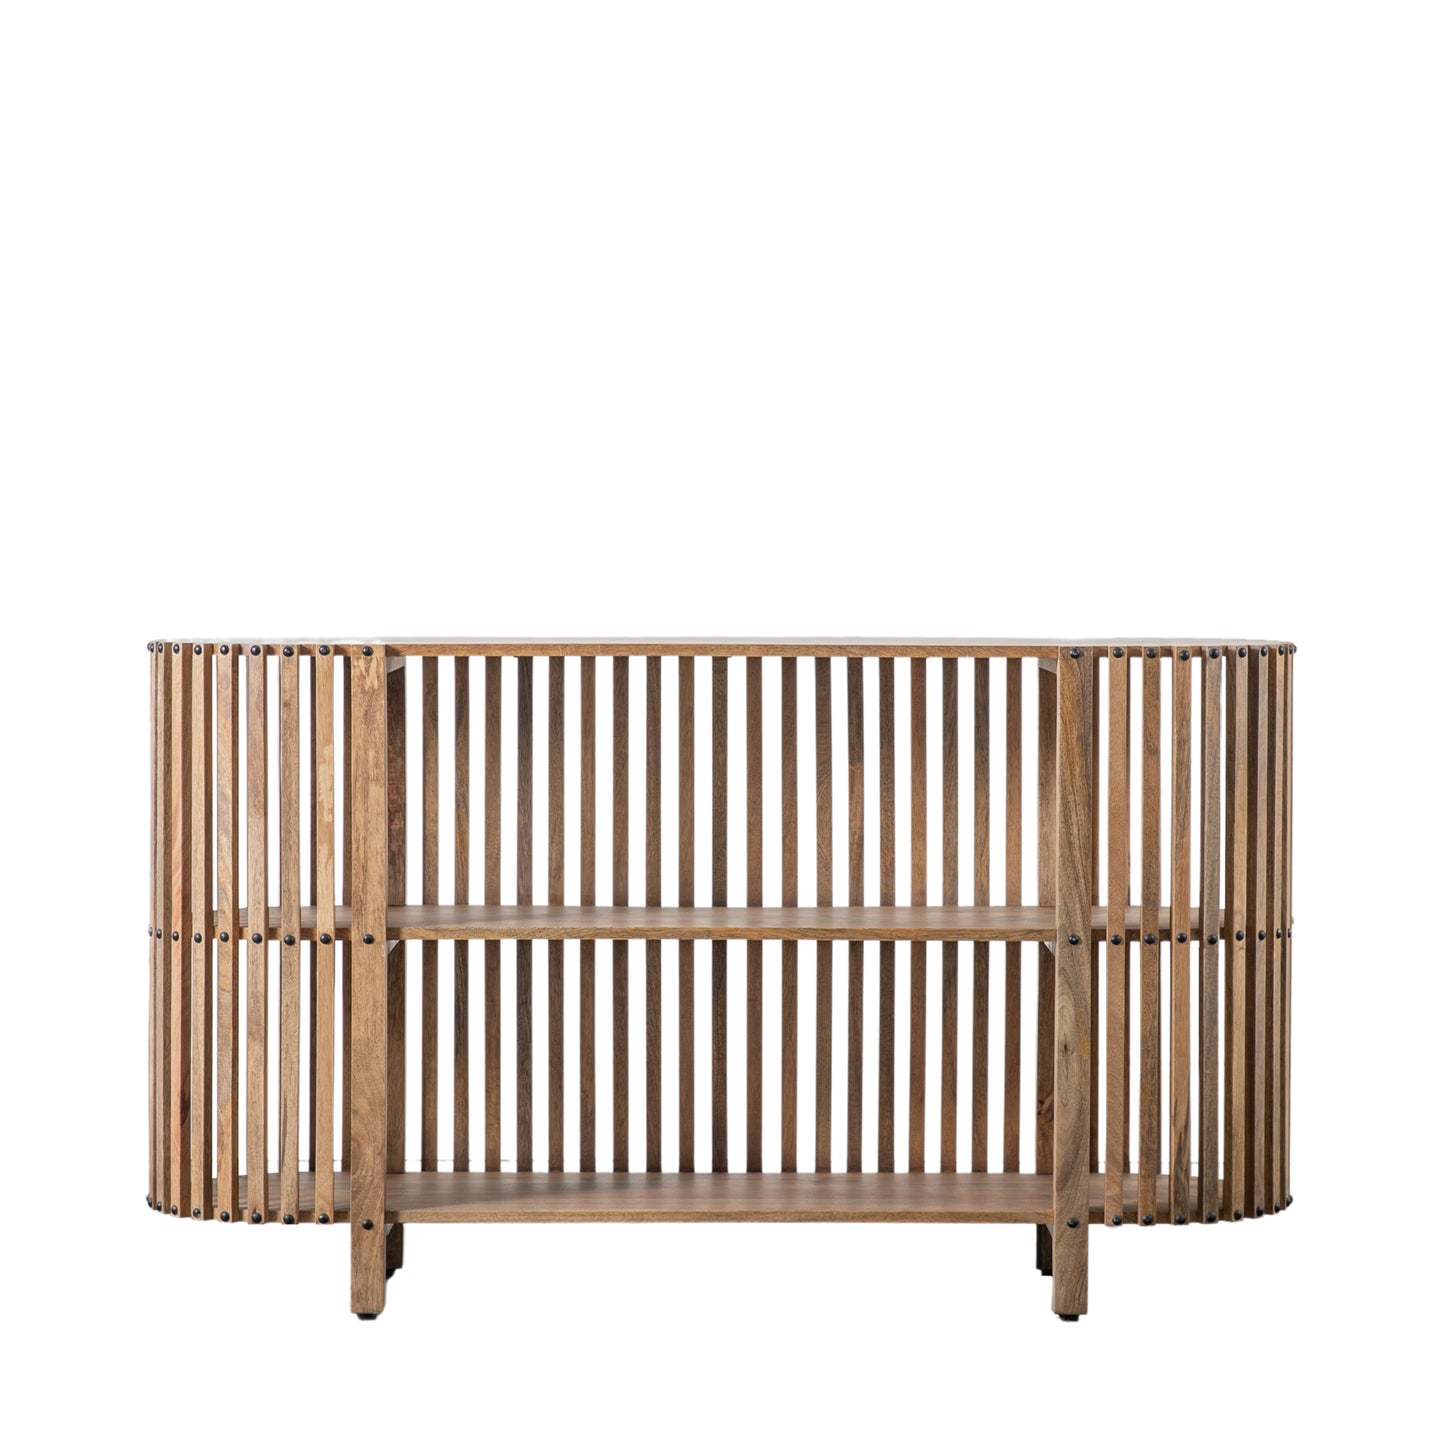 A Voss Slatted Console Table 1400x400x700mm for home furniture and interior decor enthusiasts from Kikiathome.co.uk.